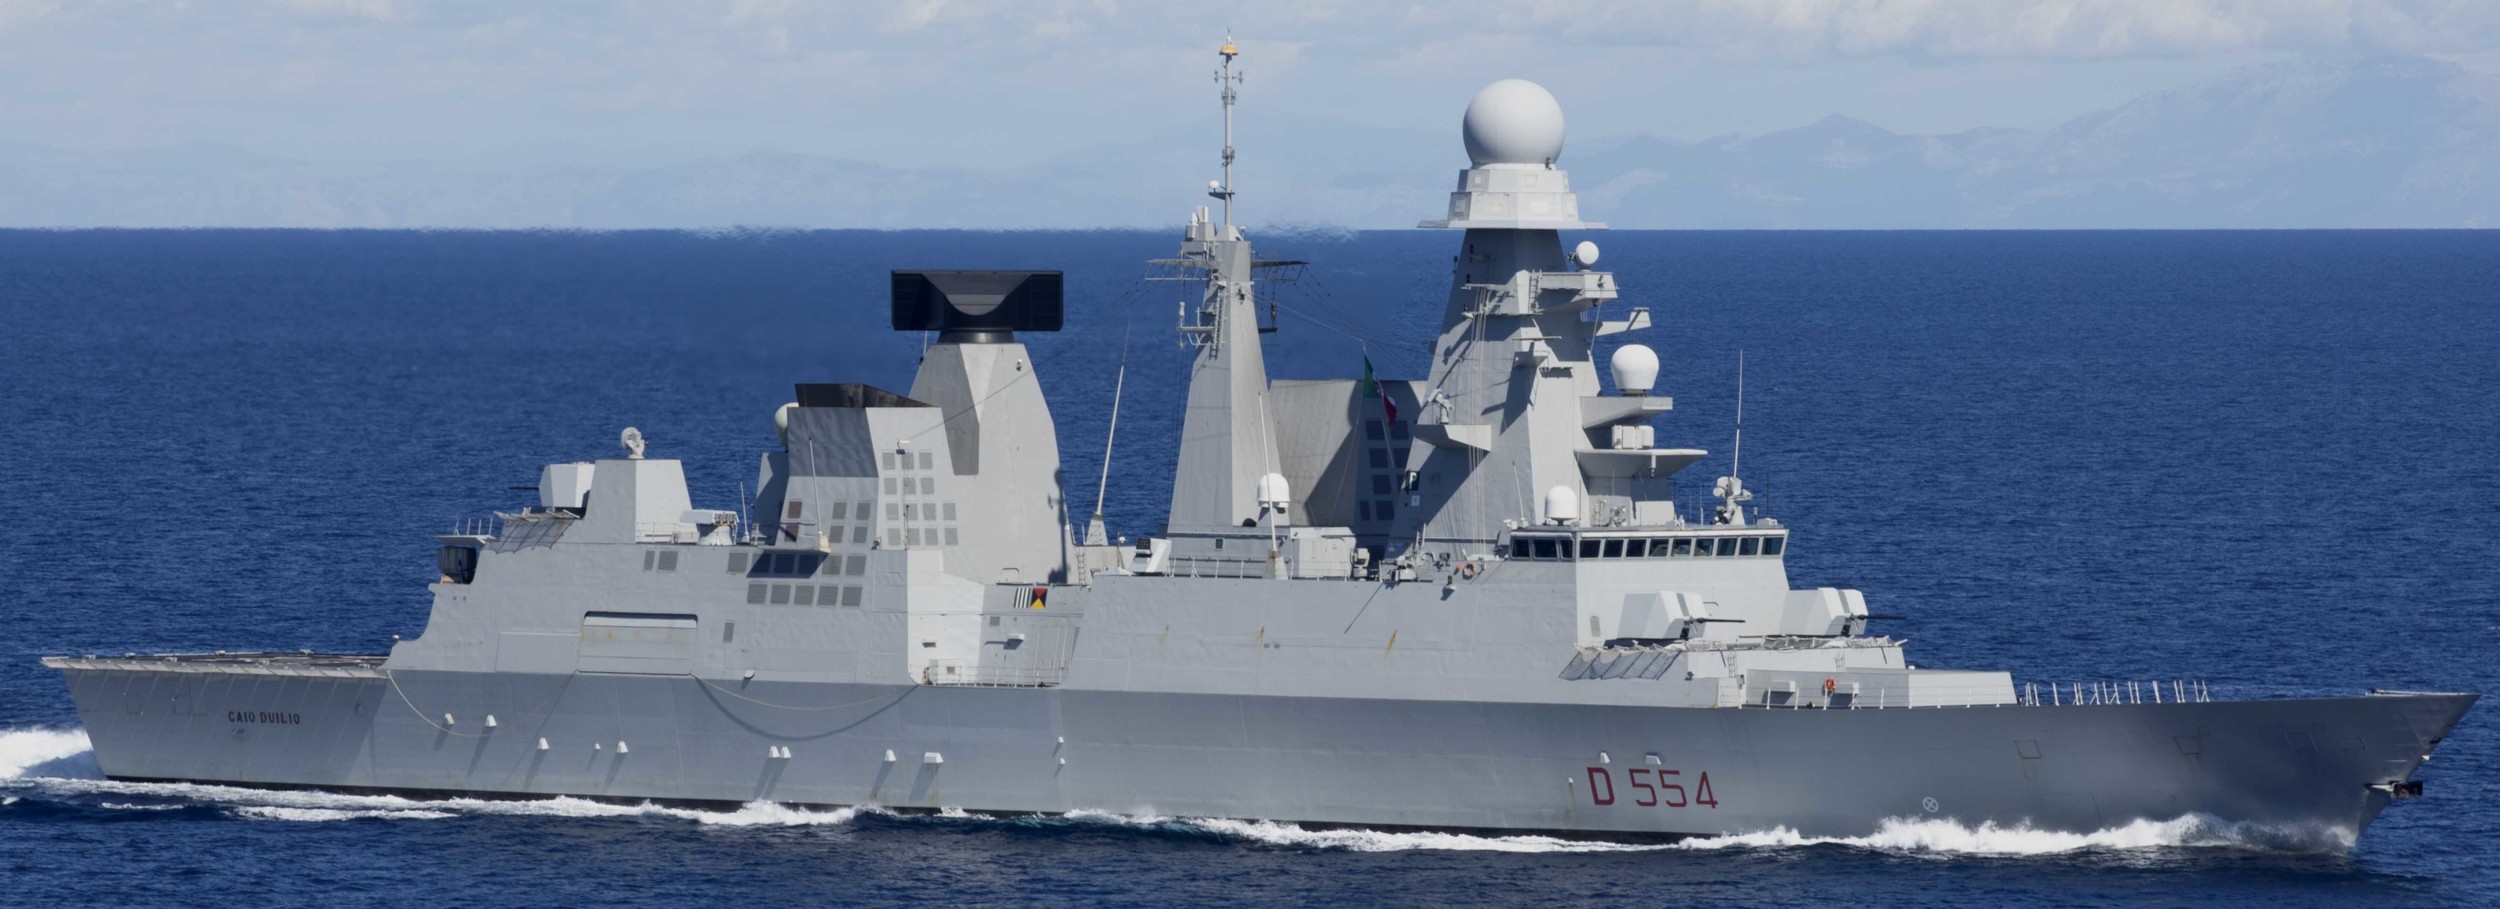 d-554 caio duilio its nave horizon class guided missile destroyer ddgh italian navy marina militare 43